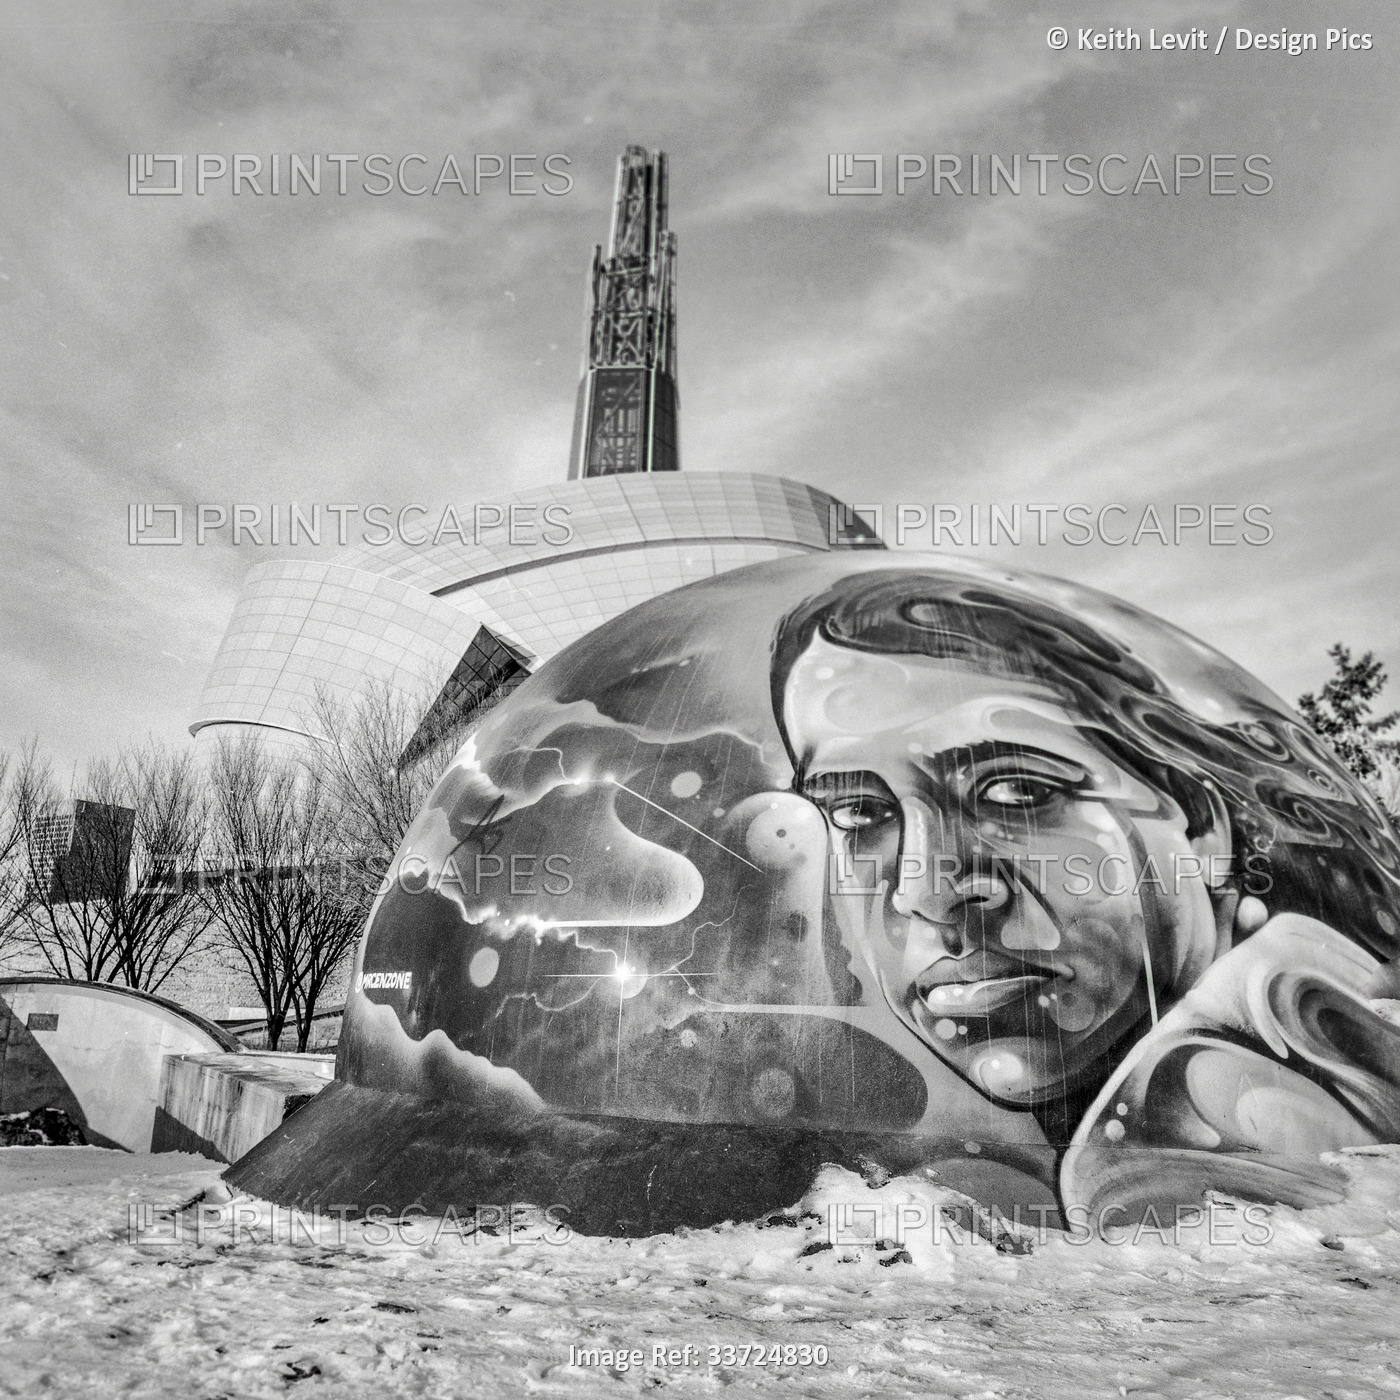 Mural honouring Jai Pereira and the Canadian Museum of Human Rights in ...